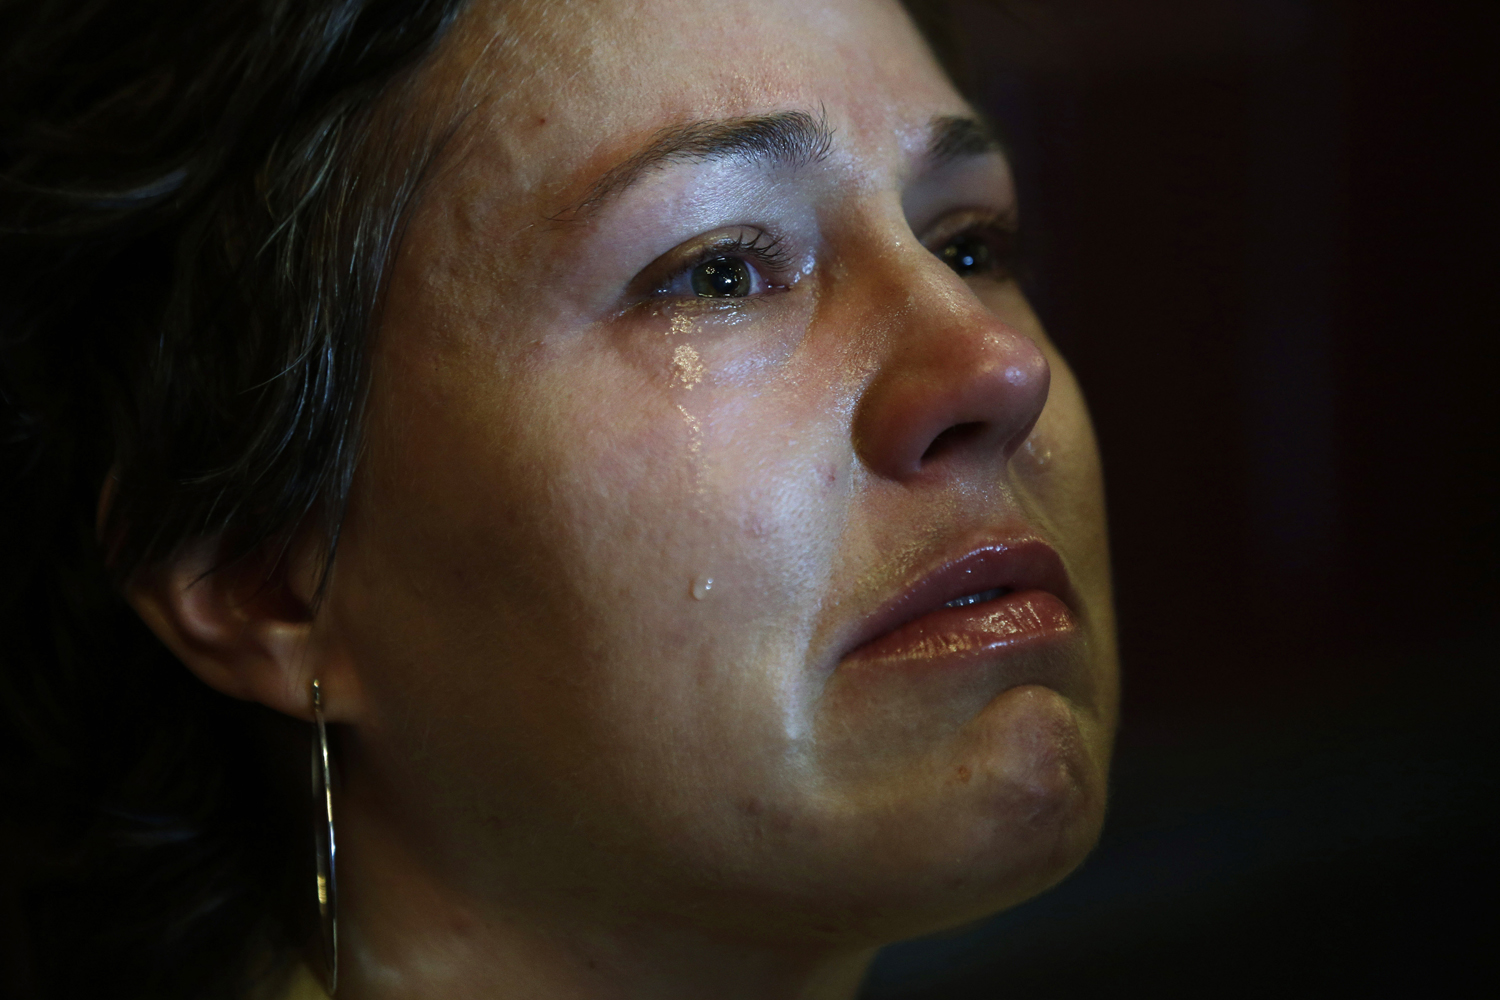 April 18, 2013. Sarah Shallbetter cries as she watches a broadcast of President Barack Obama speaking at an interfaith service at Cathedral of the Holy Cross on a video screen at the BoMA restaurant in Boston.